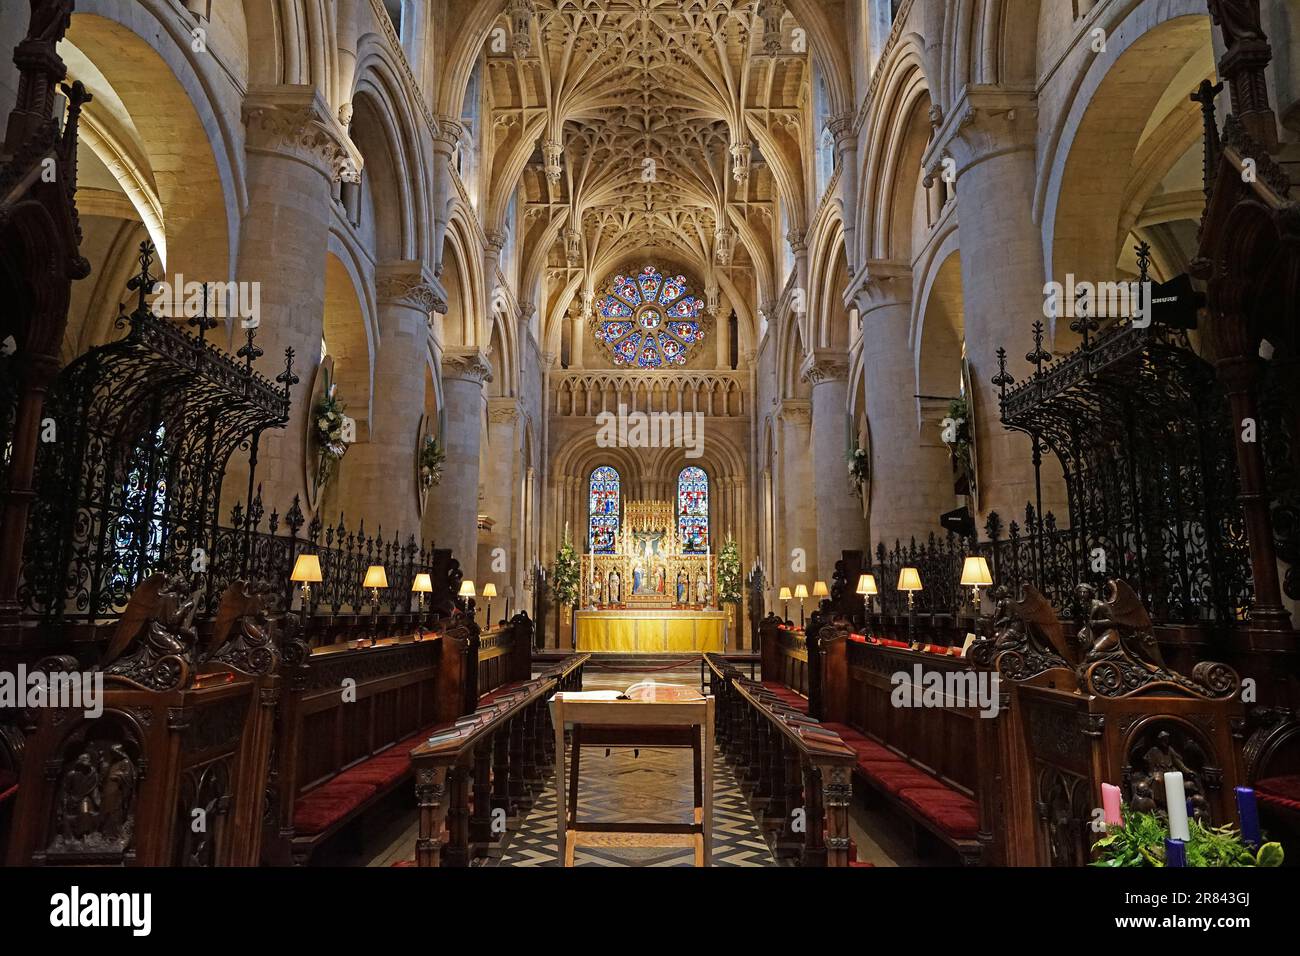 Interior European architecture and ceiling design decoration of Christ Church colleges of Oxford University and cathedral- United Kingdom Stock Photo